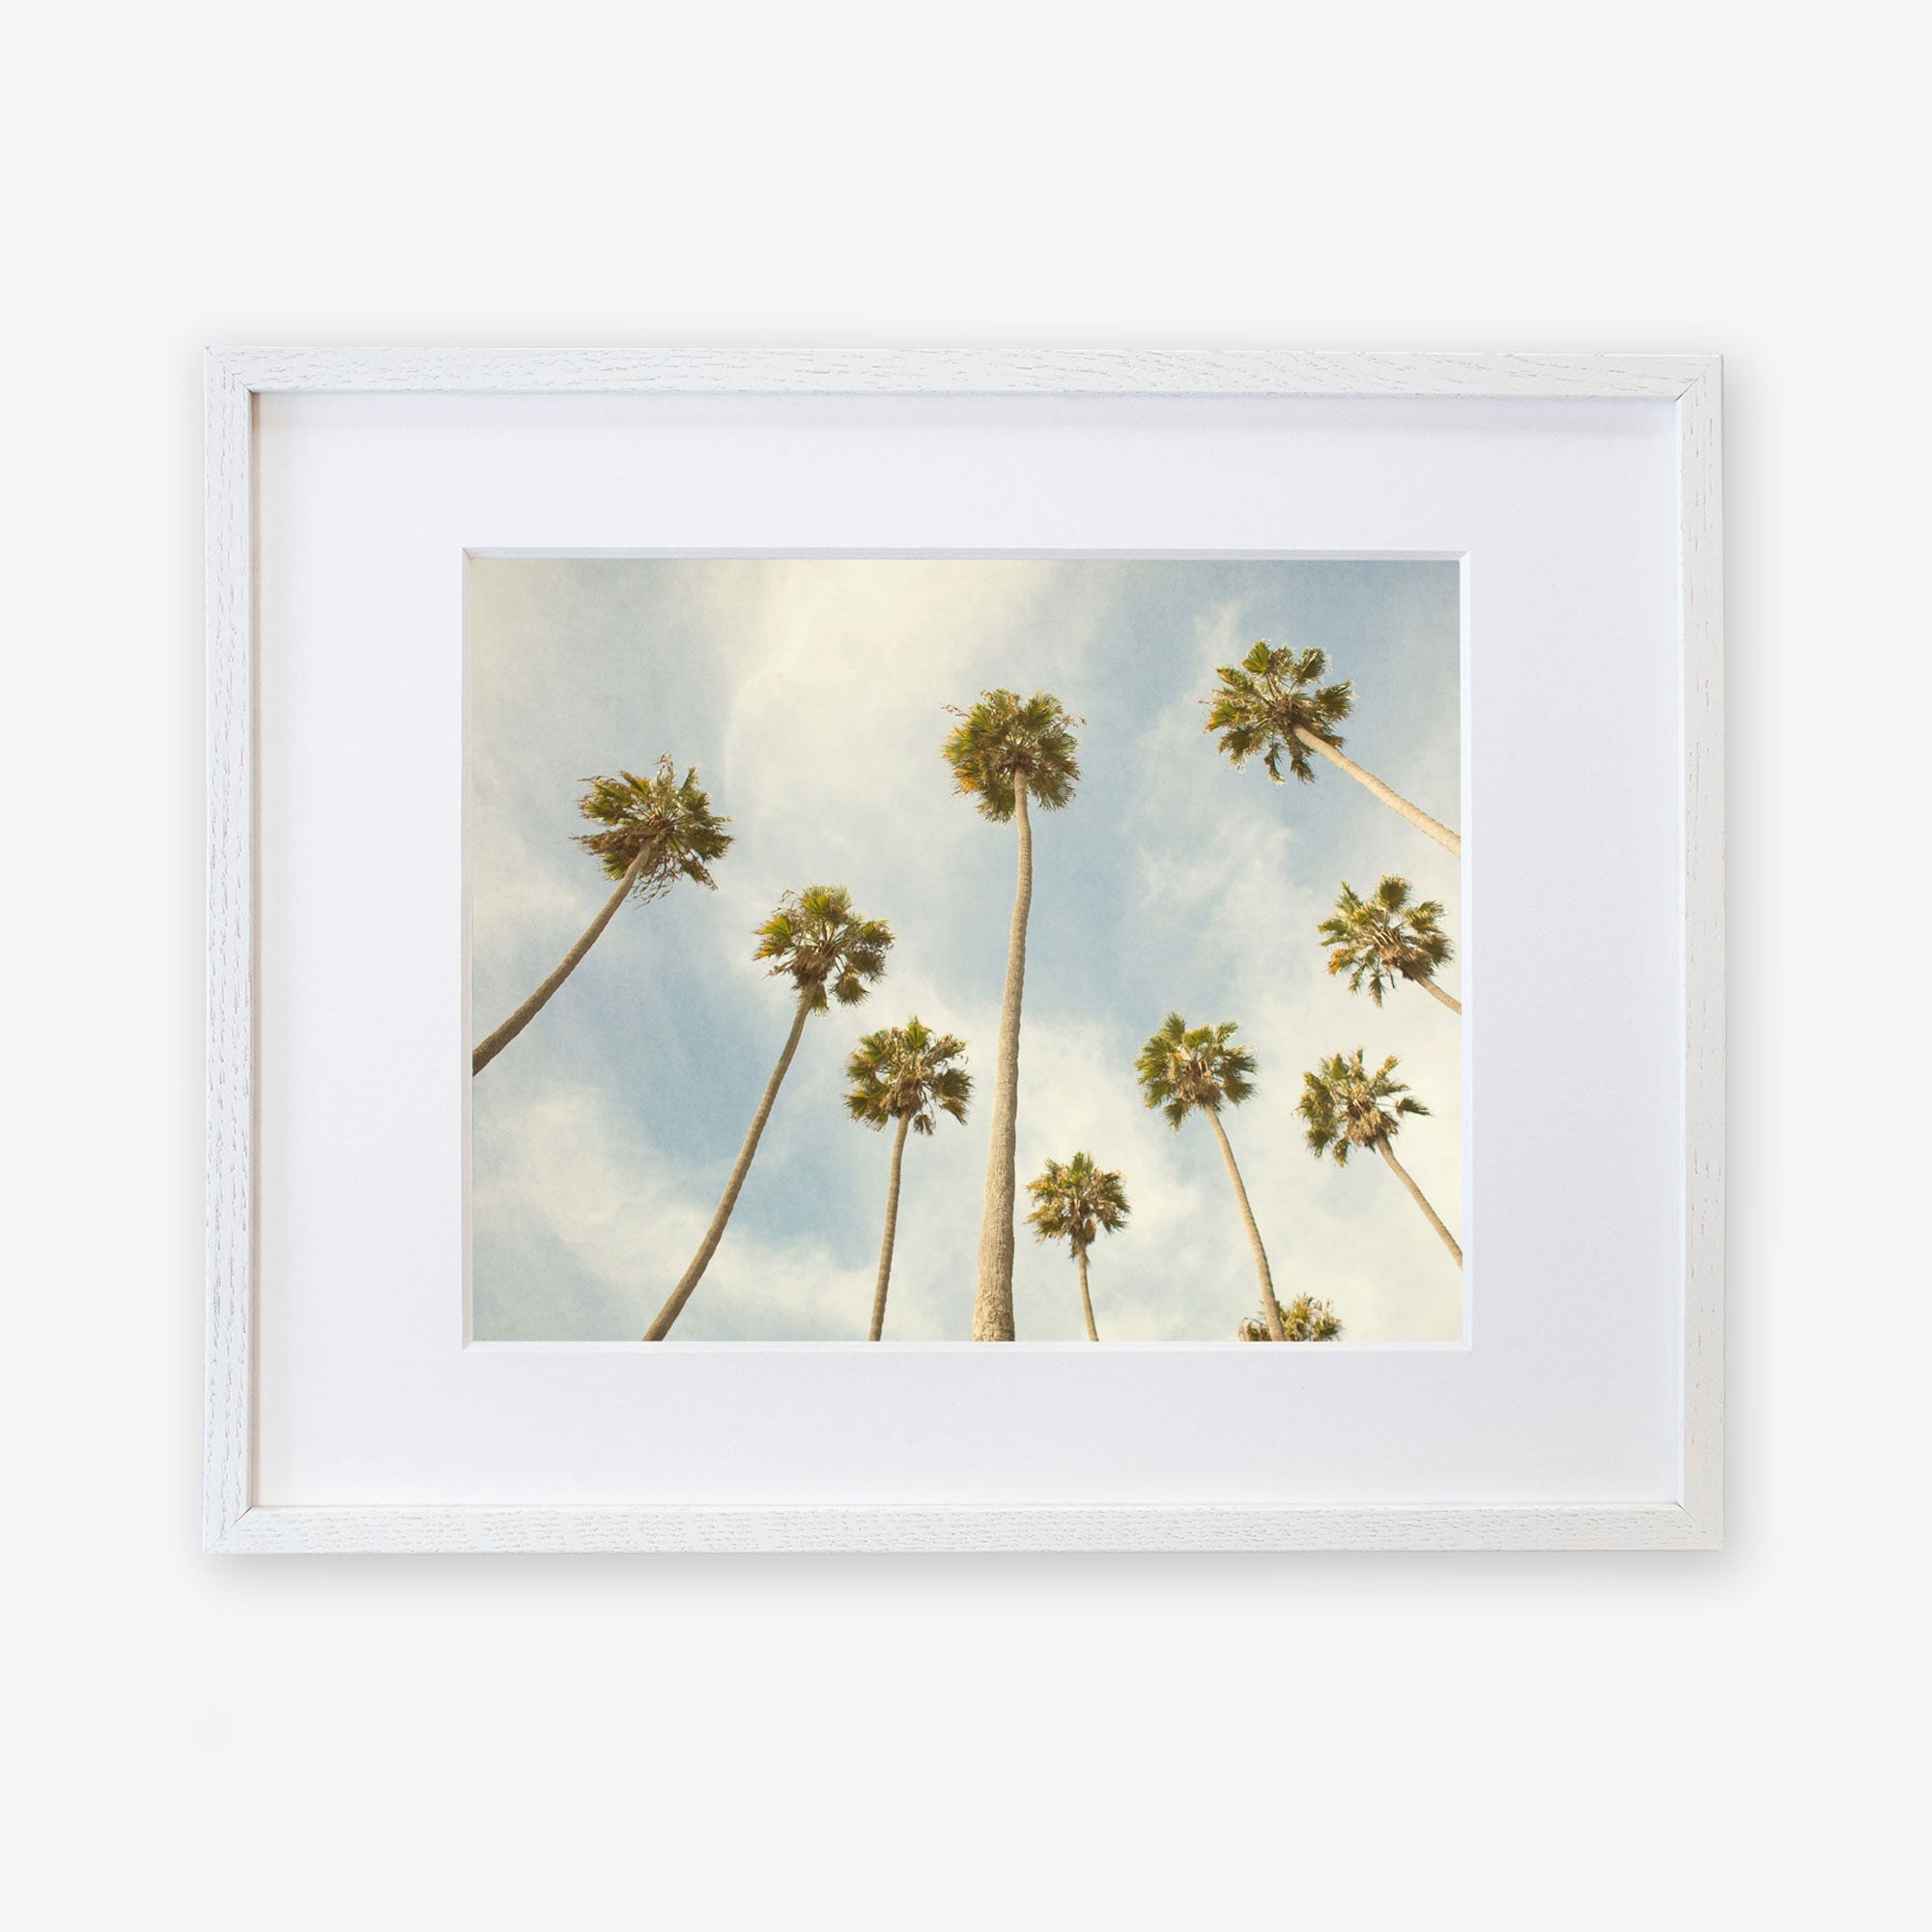 A framed photograph depicting a group of tall California palm trees viewed from below against a clear sky with soft clouds - Offley Green&#39;s Palm Tree Print, California Beach Scene &#39;Reach for the Palms&#39;